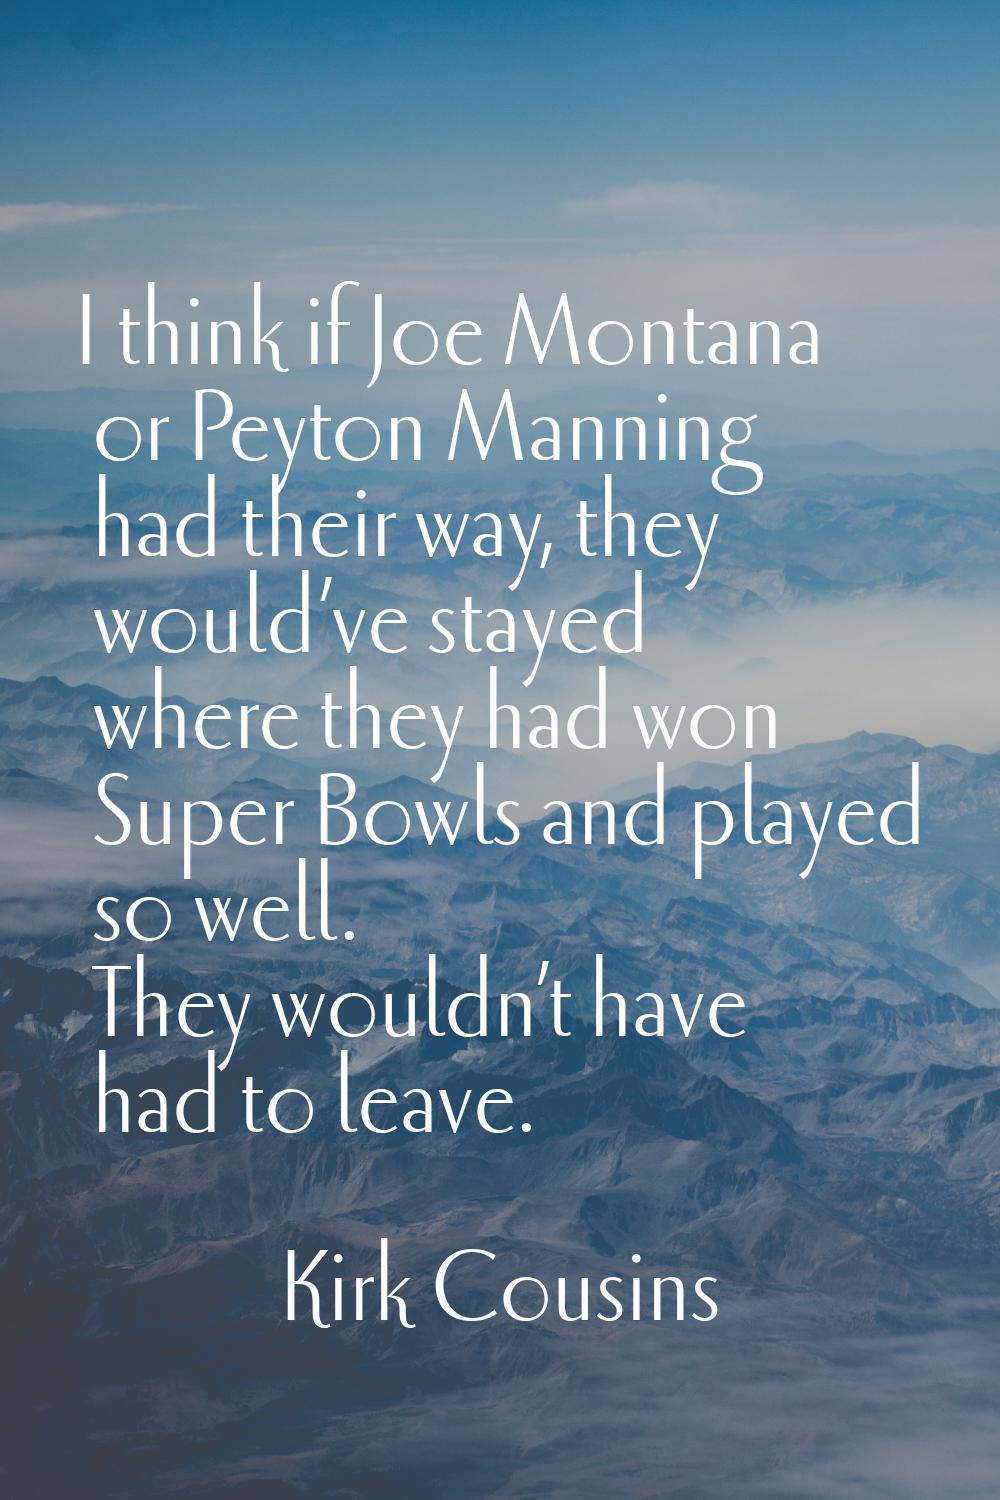 I think if Joe Montana or Peyton Manning had their way, they would’ve stayed where they had won Sup